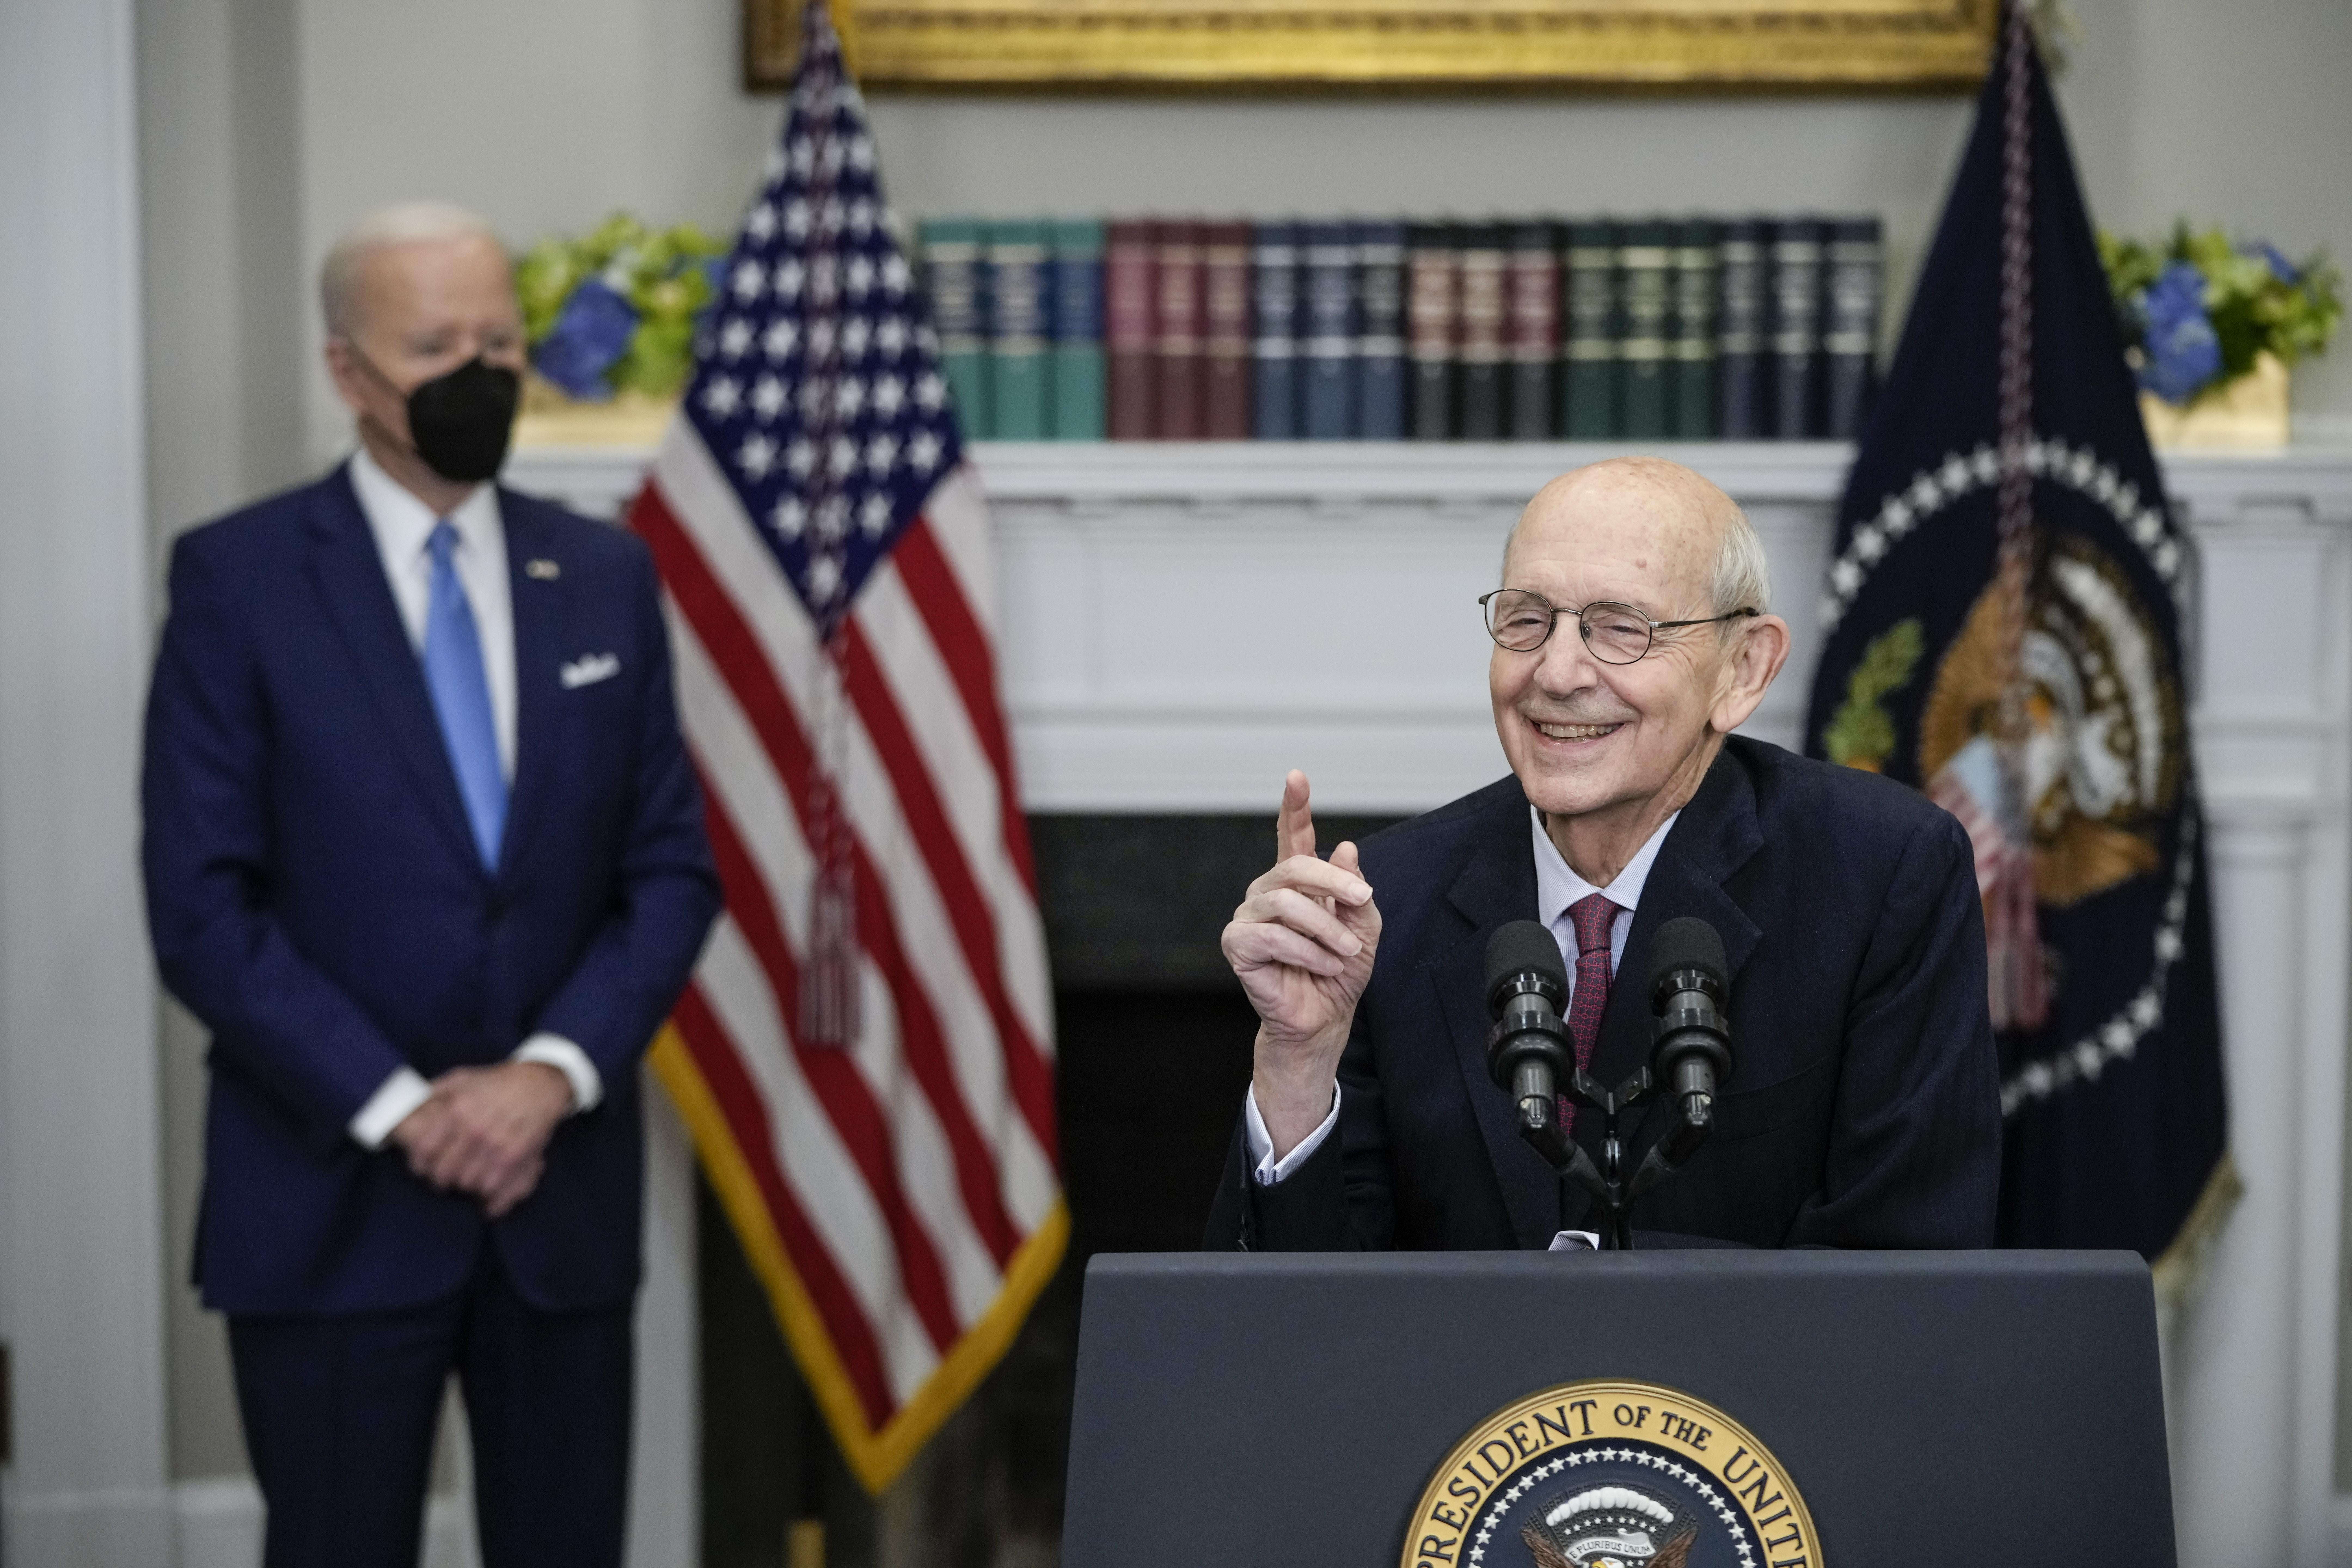 President Joe Biden looks on as Supreme Court Associate Justice Stephen Breyer speaks about his coming retirement in the Roosevelt Room of the White House on January 27, 2022 in Washington, D.C.